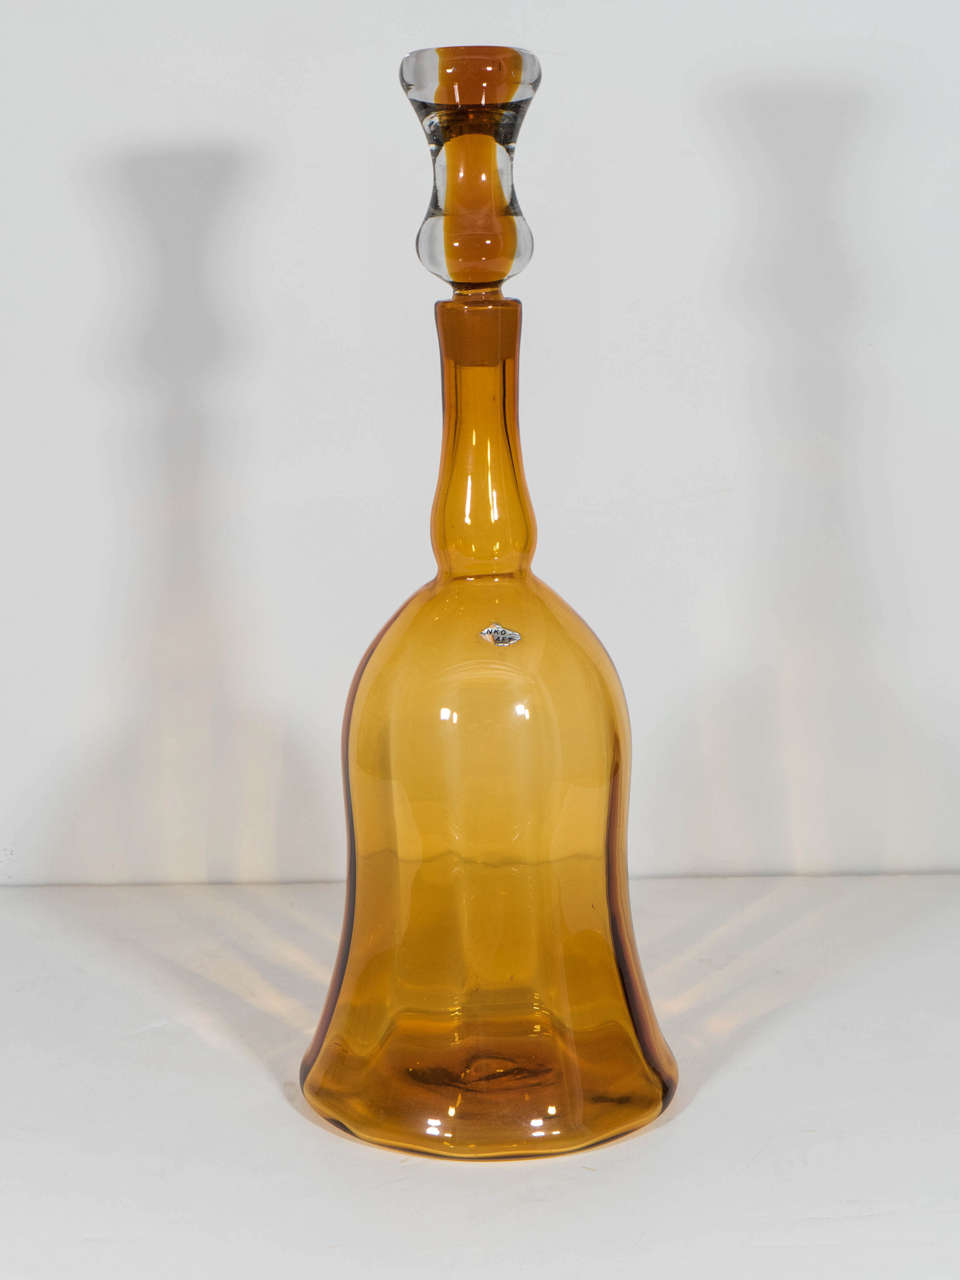 A vintage Blenko # 6934 blown glass decanter with crystal encased stopper in wheat. Designed in 1969 by Joel Myers for the Blenko Glass Co. of Milton, West Virginia.